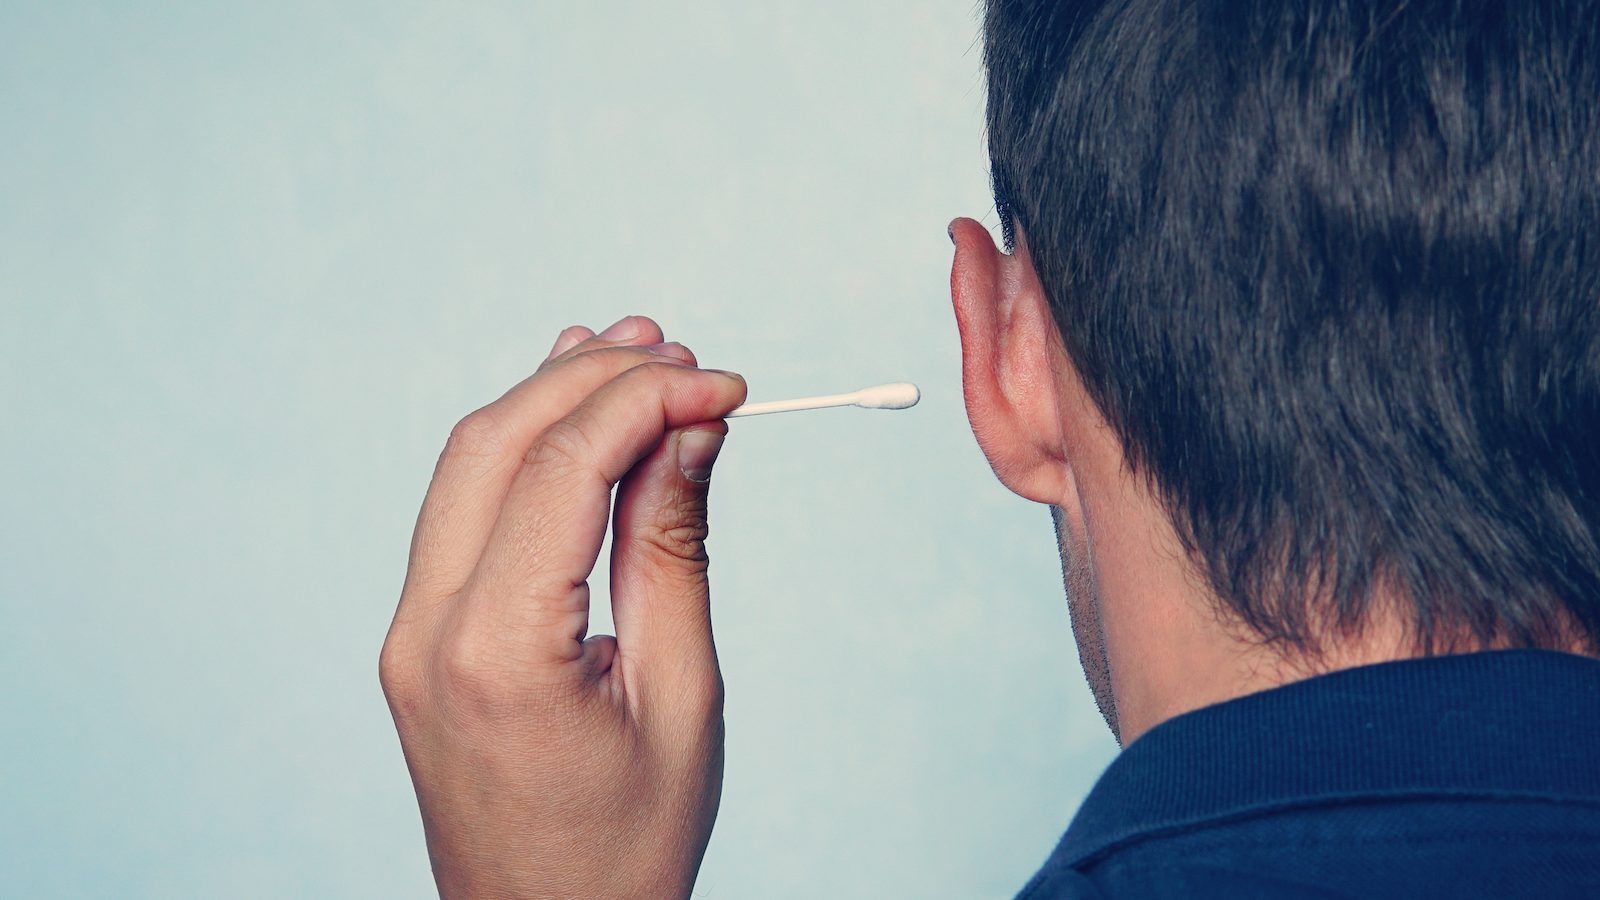 Putting a cotton swab in your ear canal can damage your ears. GETTY